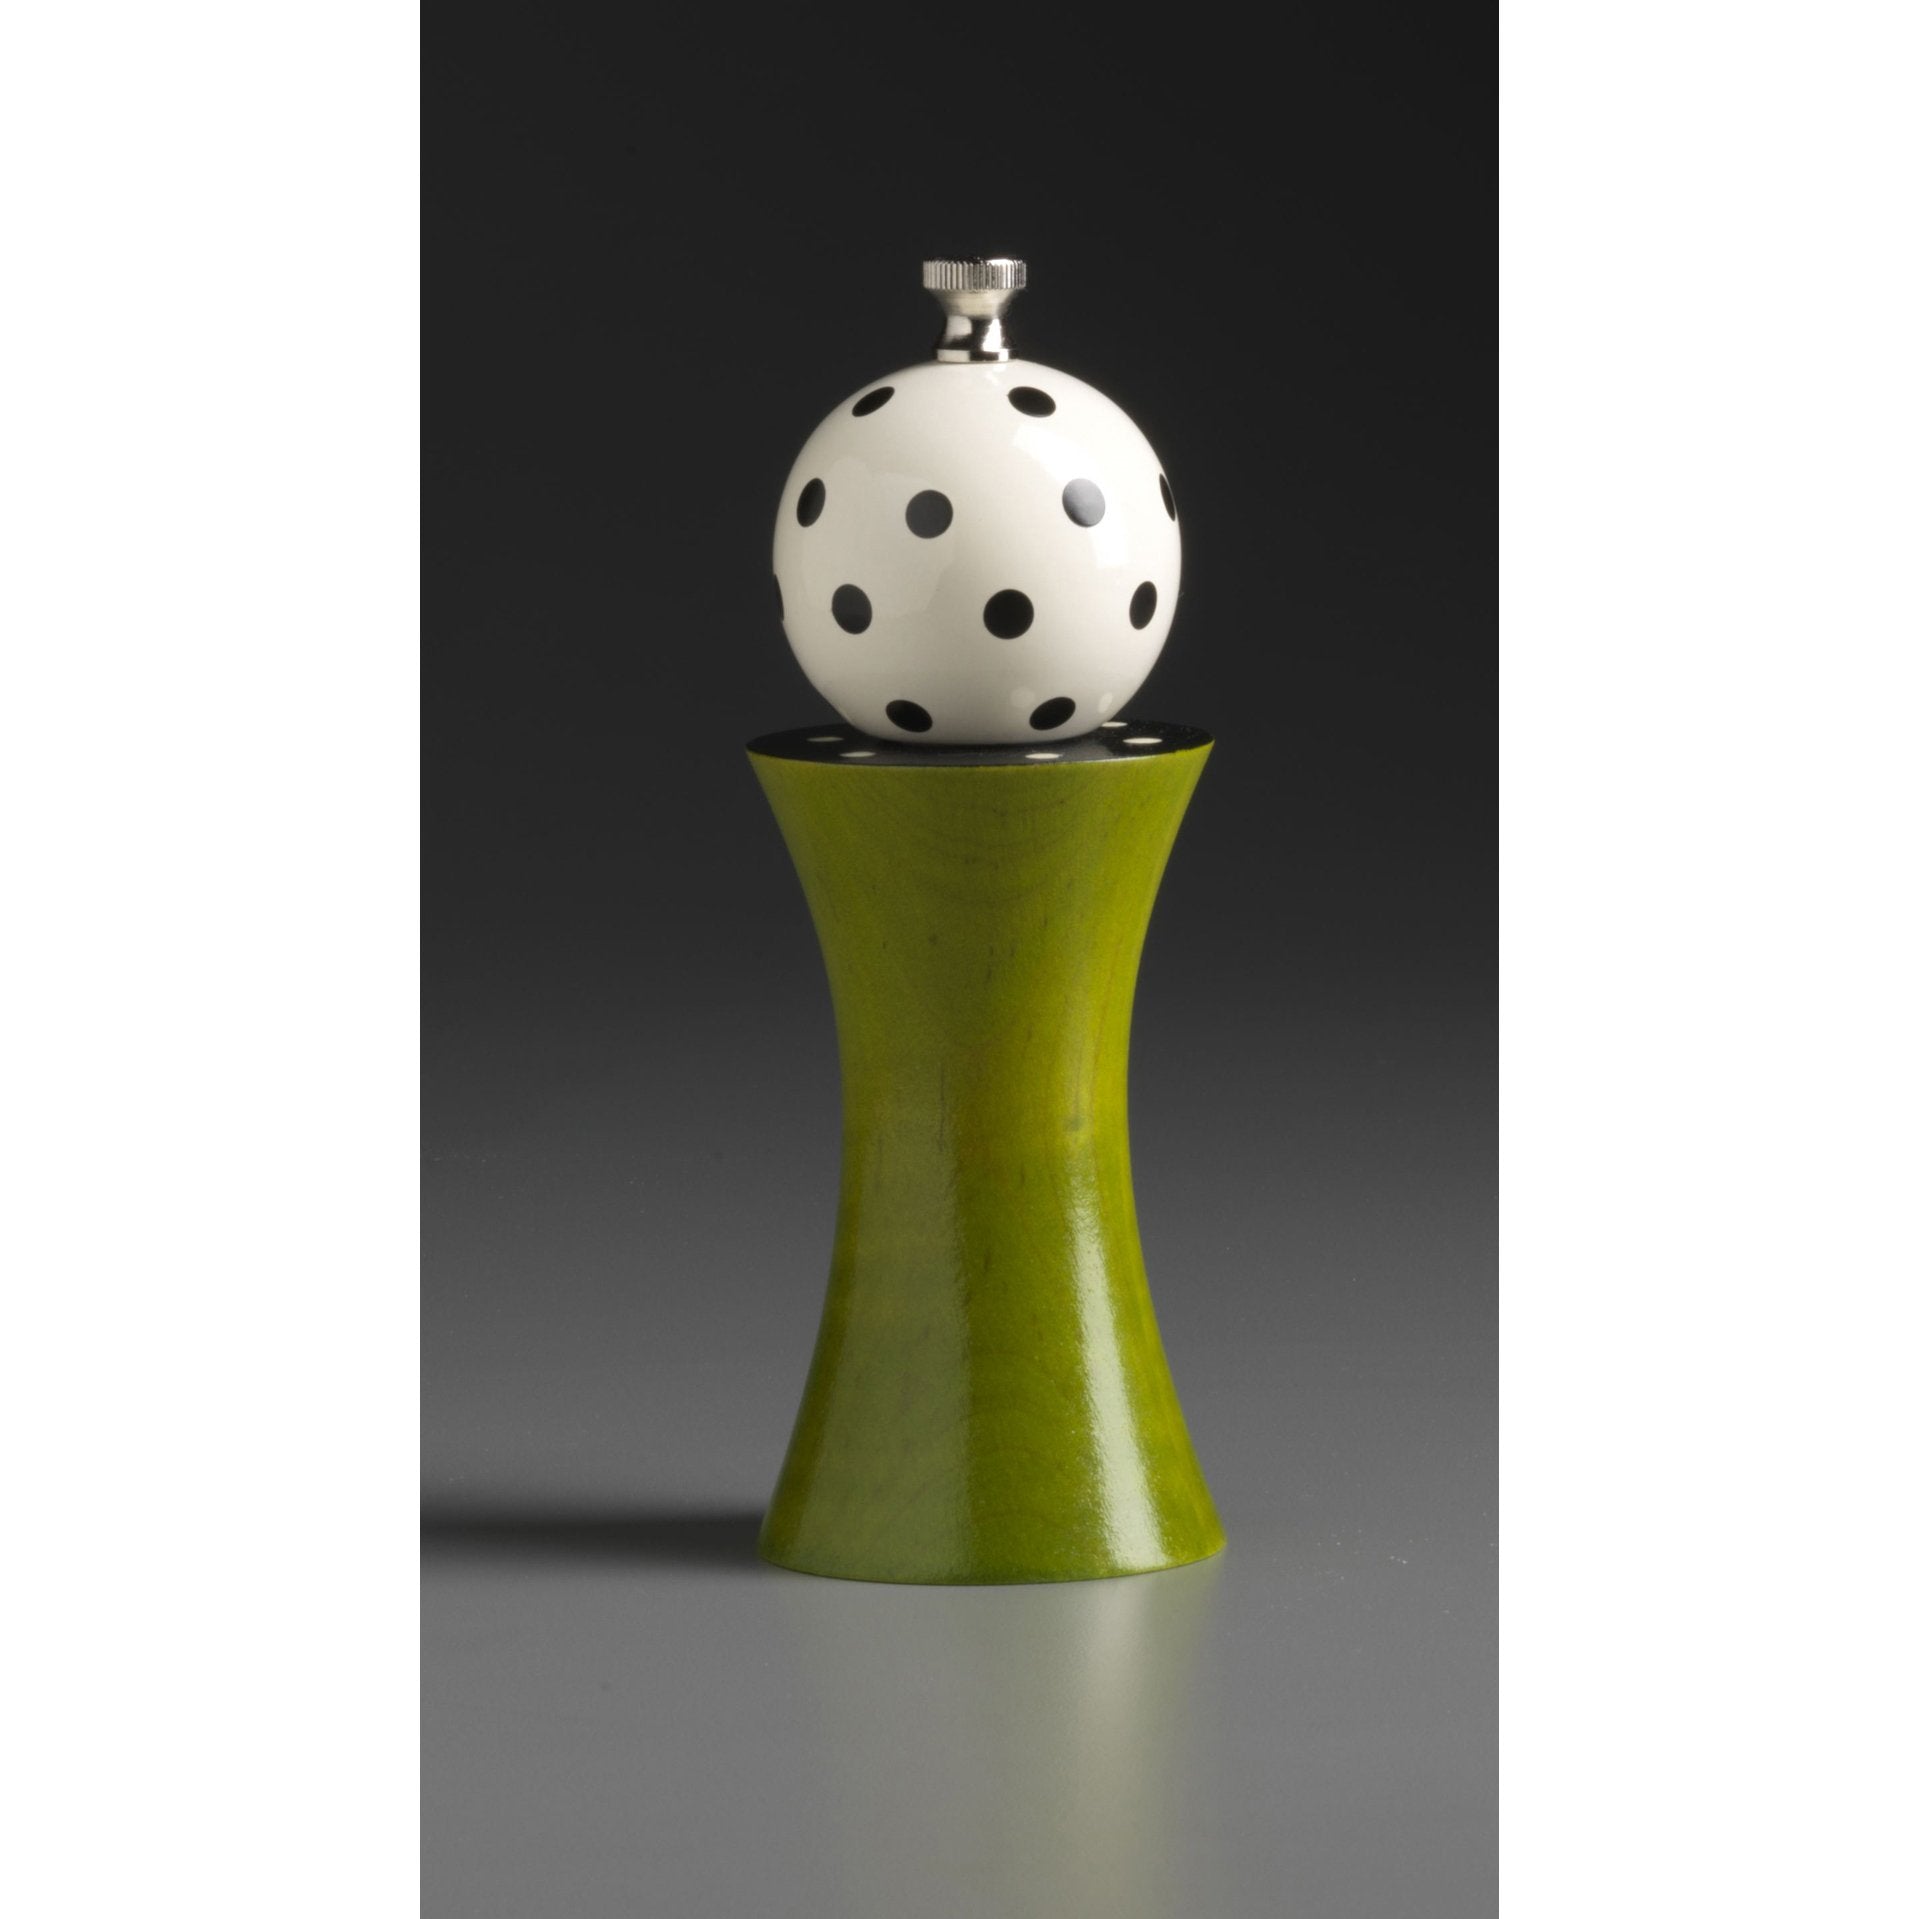 https://www.sweetheartgallery.com/cdn/shop/products/Wood-Salt-or-Pepper-Mill-Grinder-Alpha-in-Lime-White-and-Black-by-Robert-Wilhelm-of-Raw-Design-Artistic-Artisan-Designer-Handmade-Wood-Salt-And-Pepper-Mills-Grinders-and-Shakers.jpg?v=1590419085